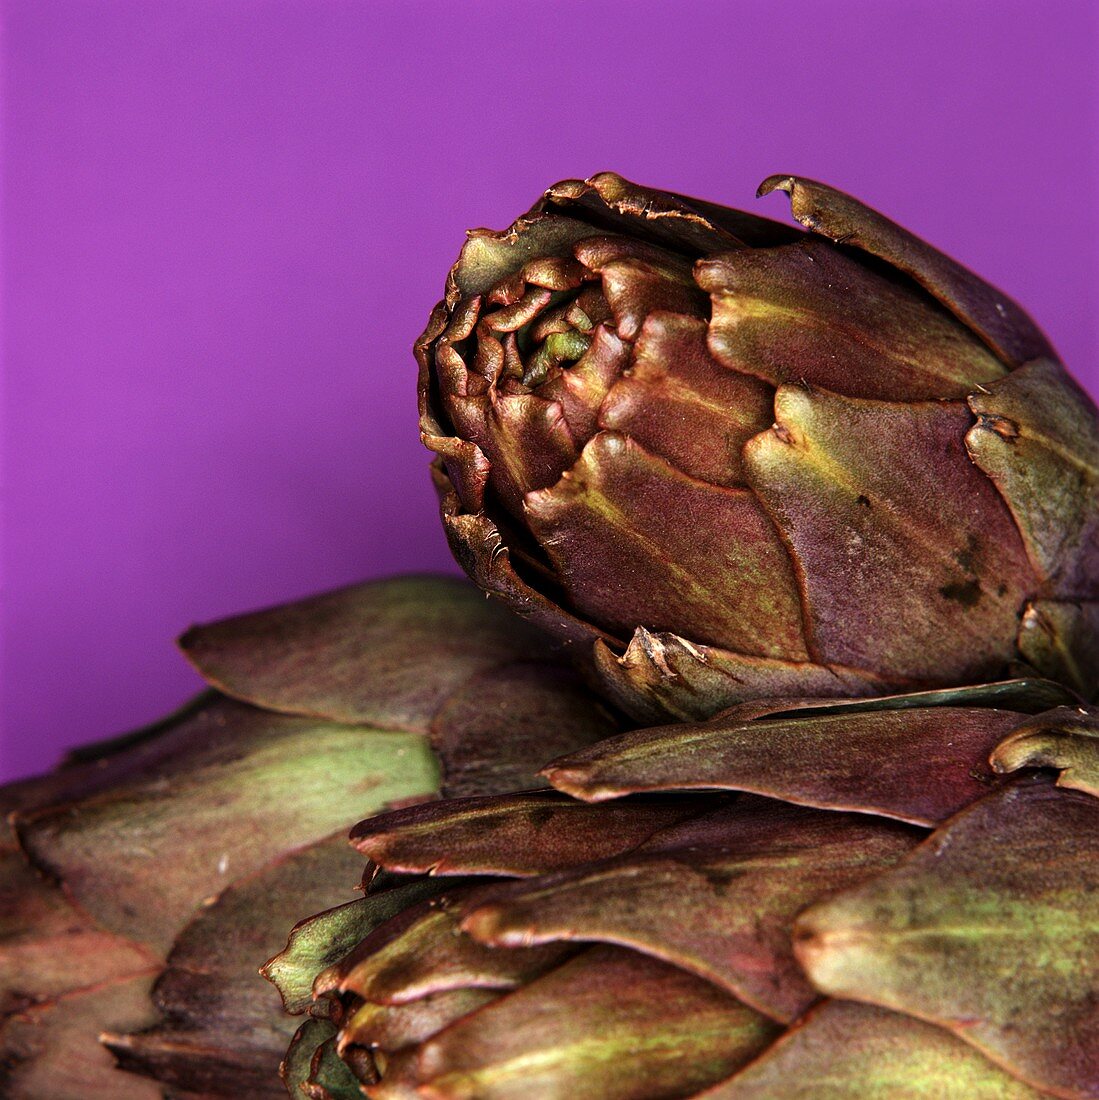 Three artichokes of different sizes (close-up)